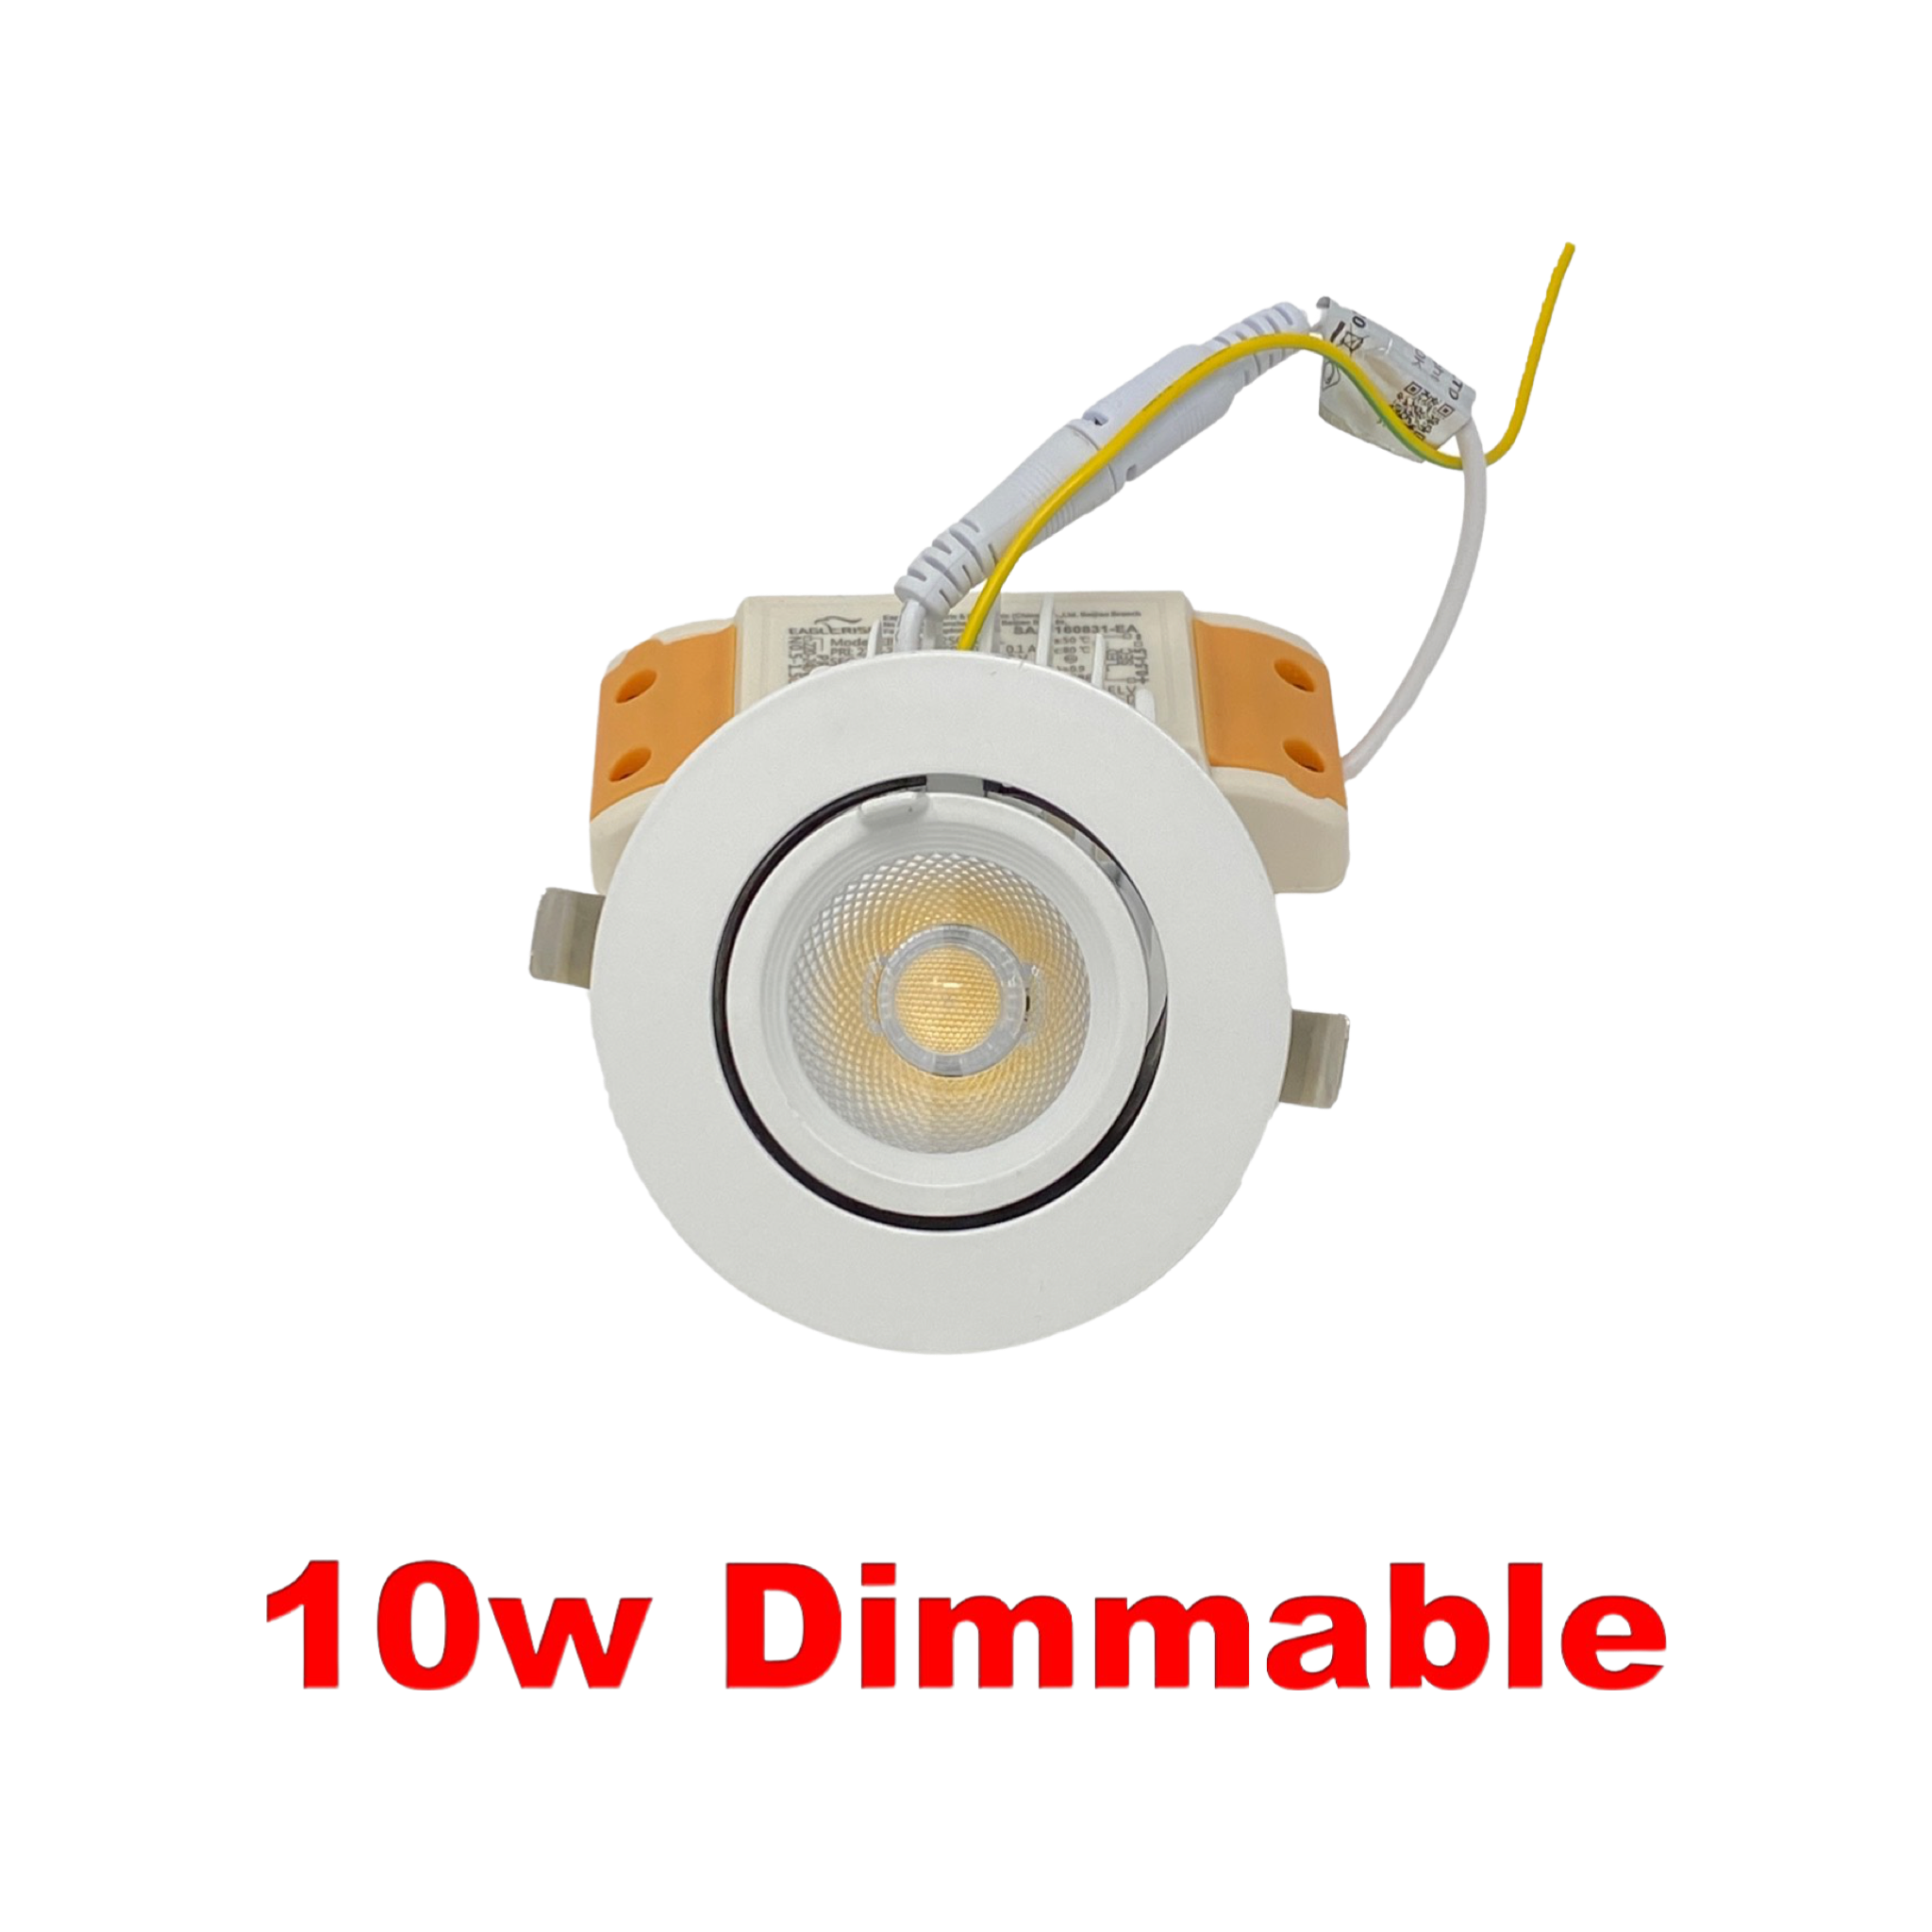 Dimmable LED Scoop DownLight Commercial Directional Adjustable Retail Lights 10w UKEW